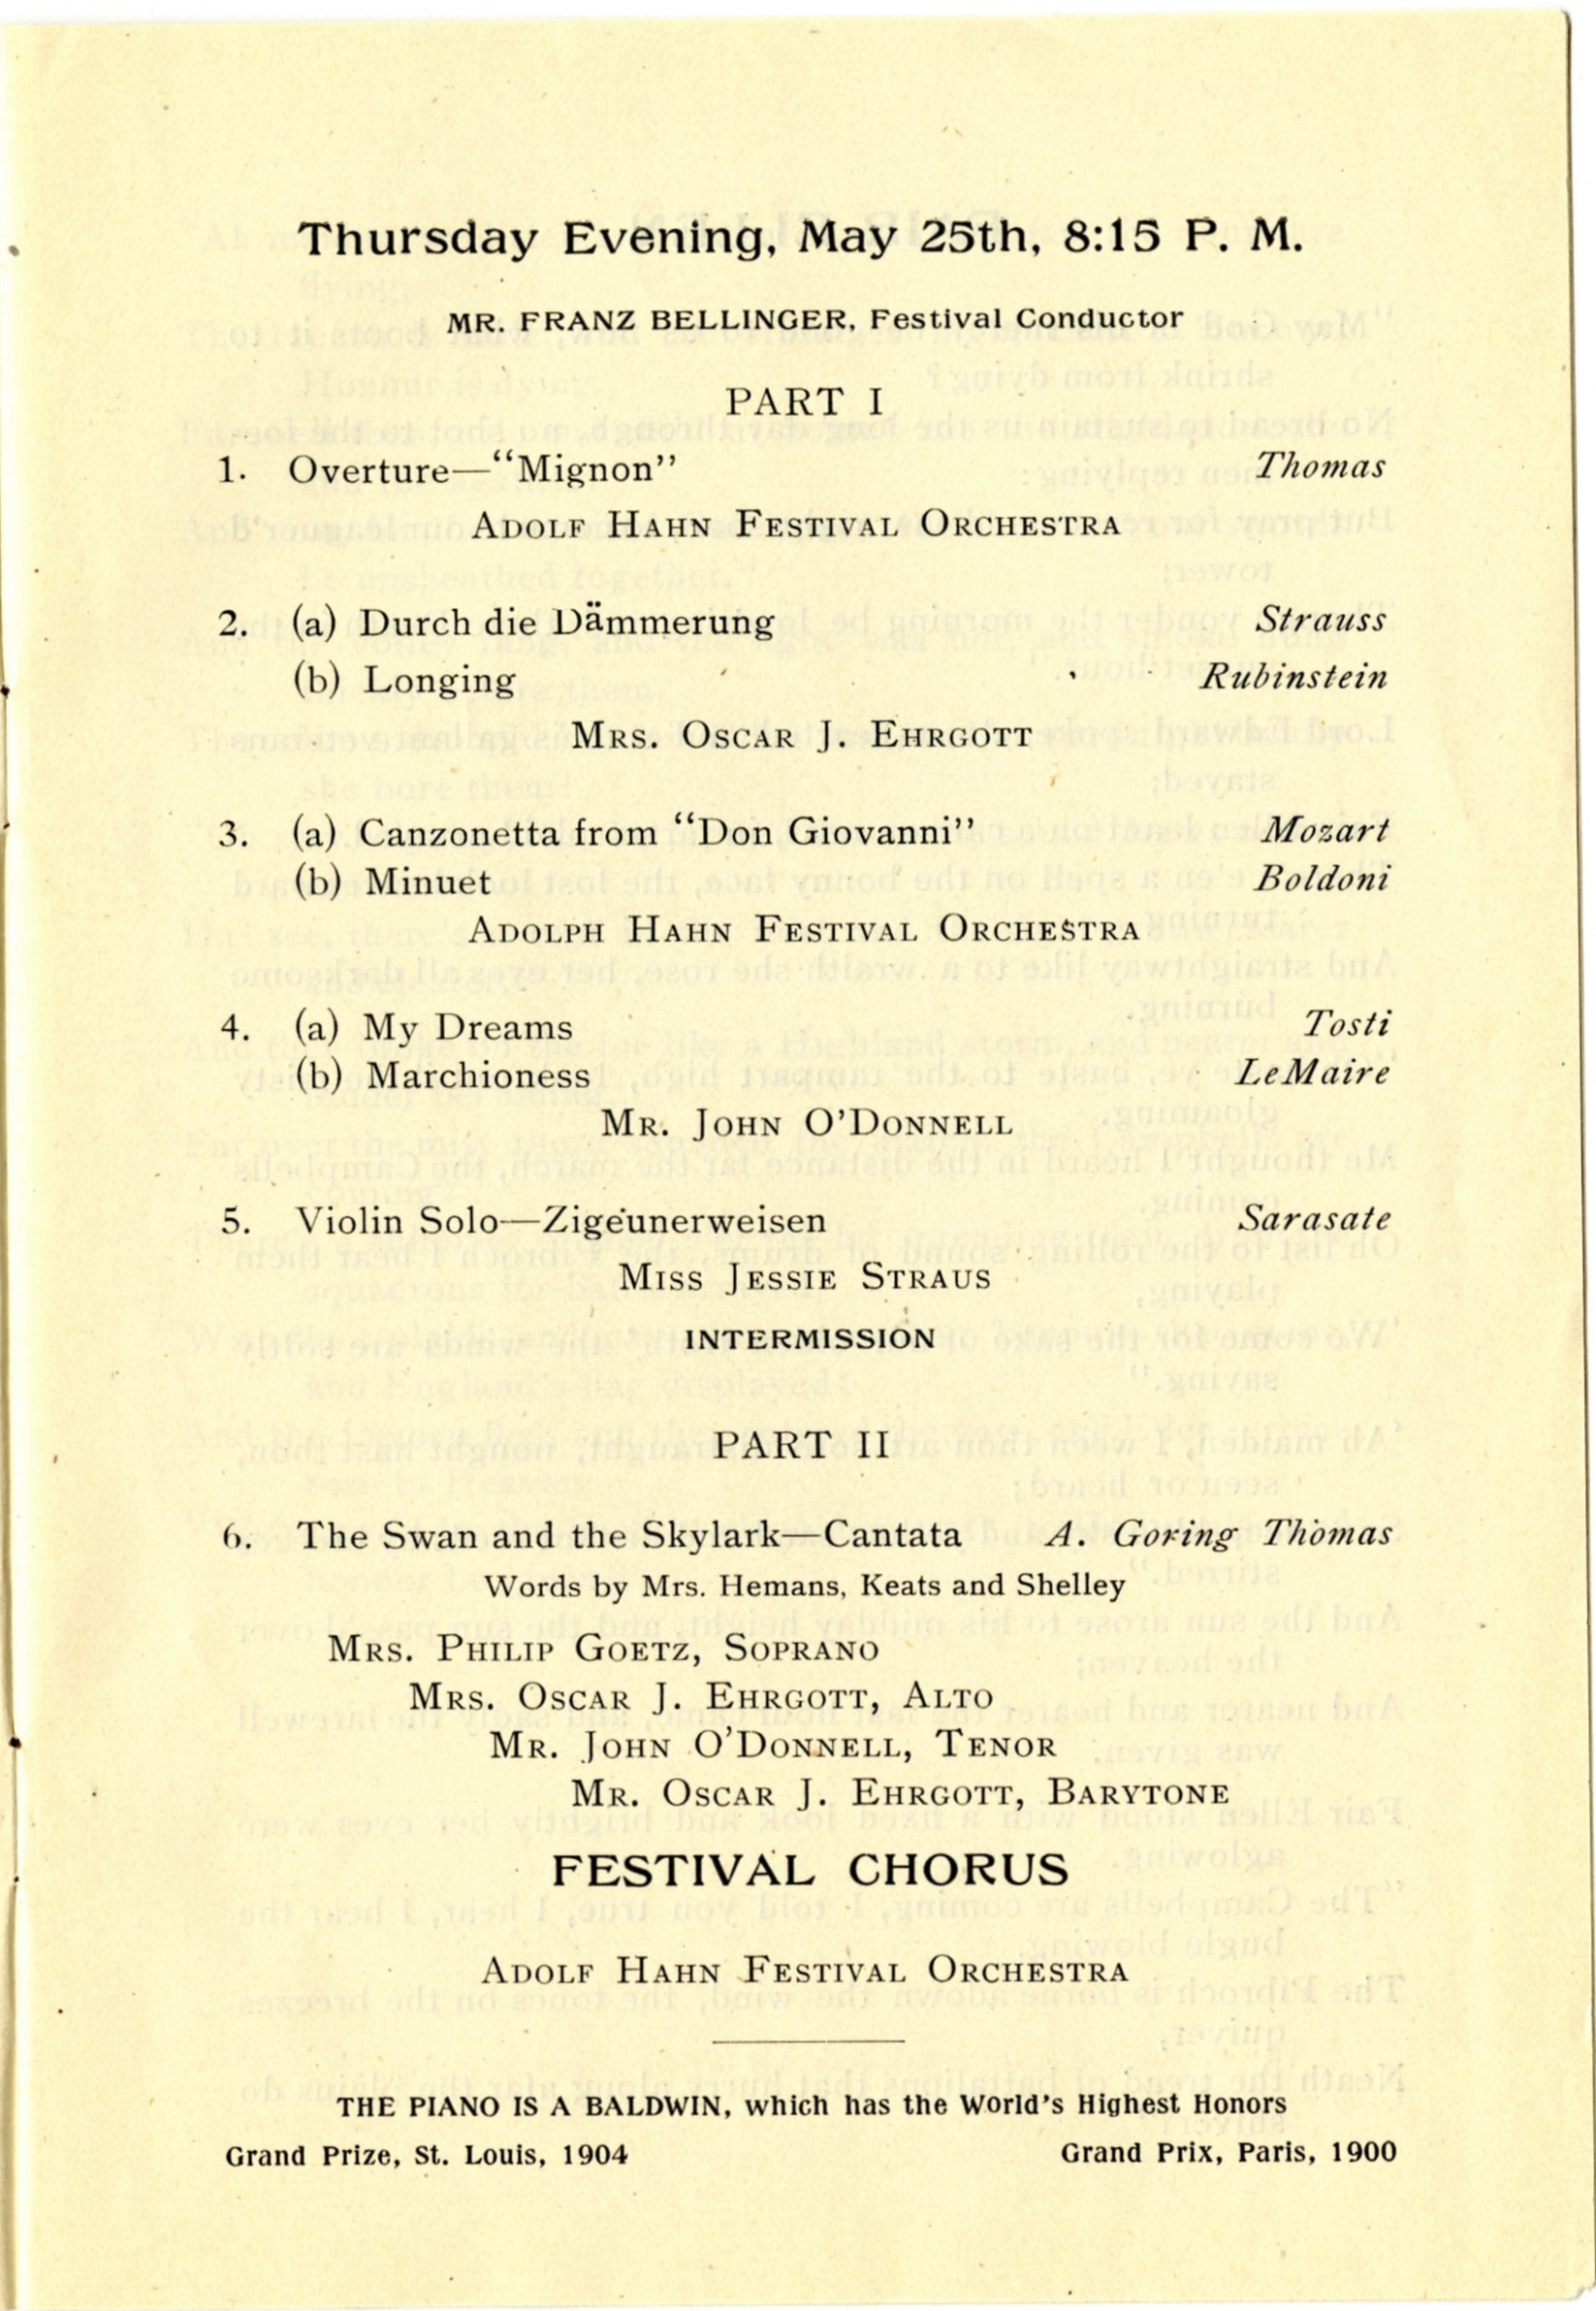 Section of the program for the 1905 May Festival, IU Archives